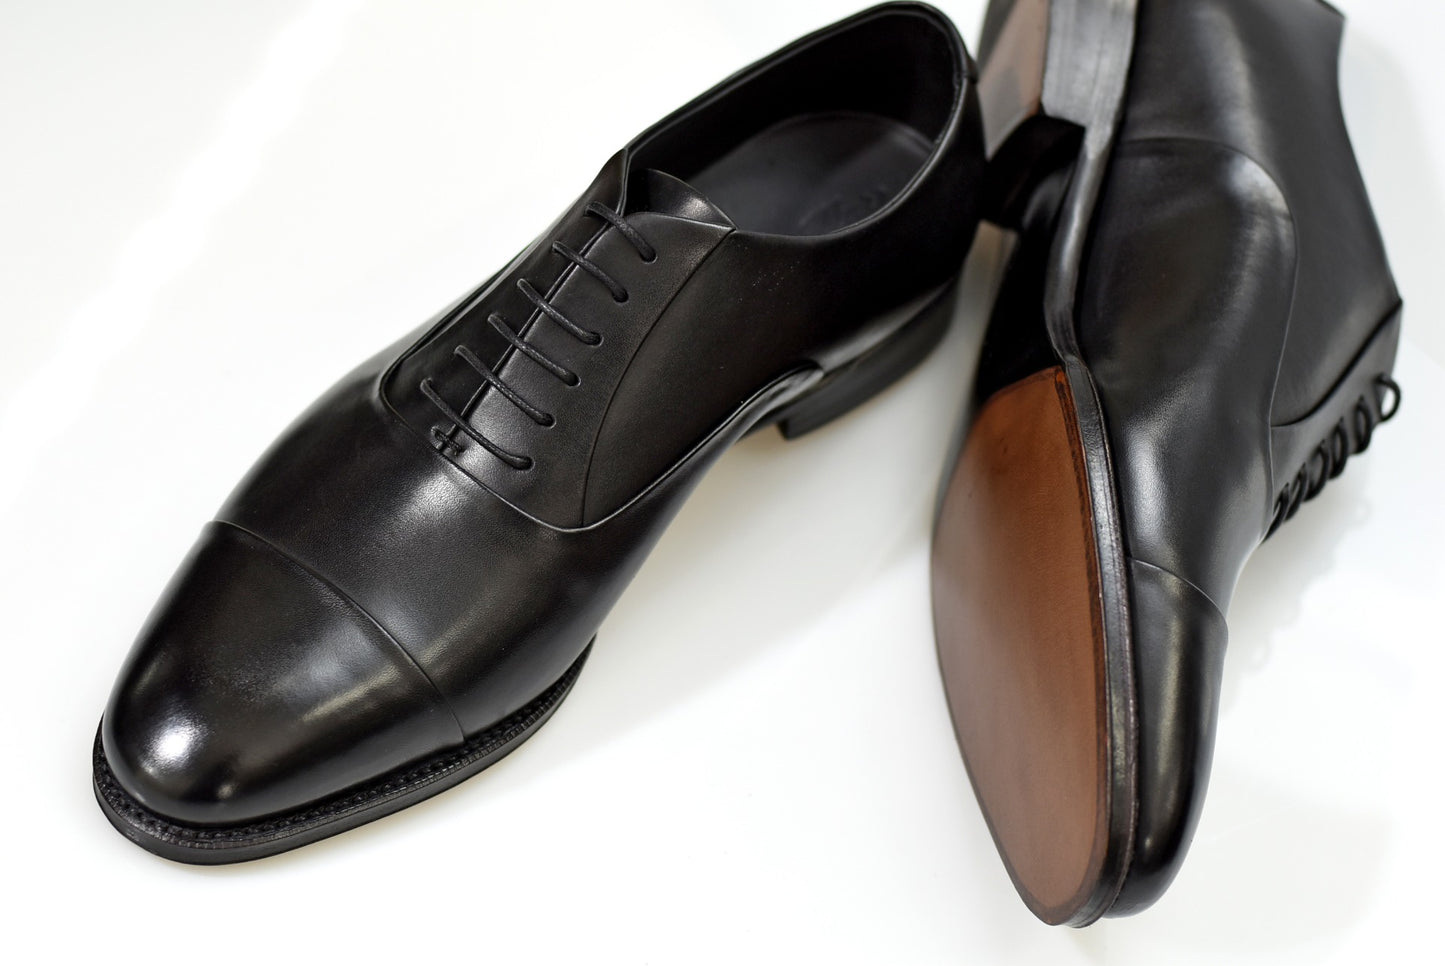 “Trea” Cap toe with reverso seams, Black Dress Shoes, Annonay Vegano, Goodyear welted, US size 5 1/2 ~ 10